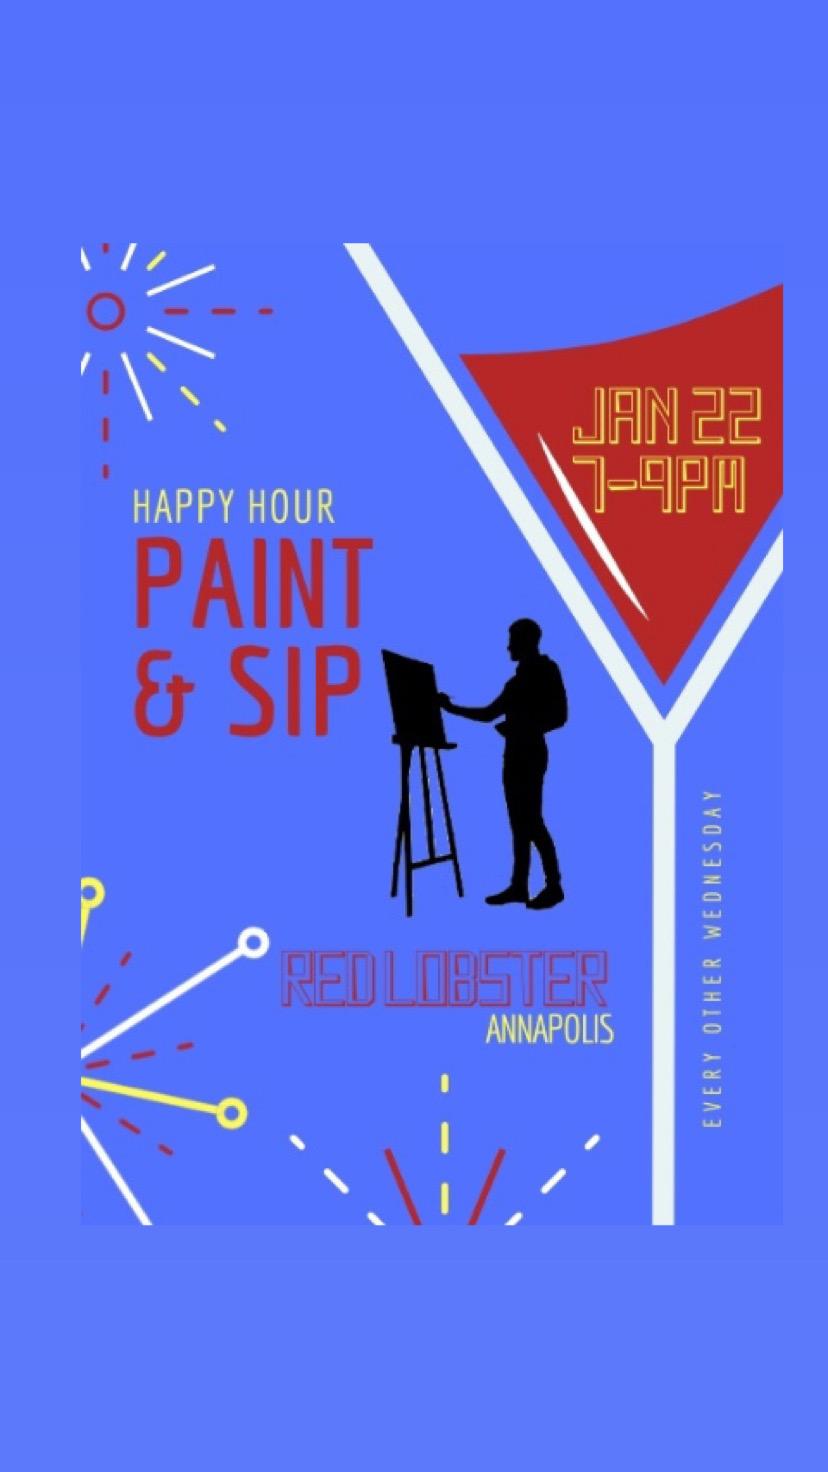 MD's hottest Happy Hour PAINT & SIP!